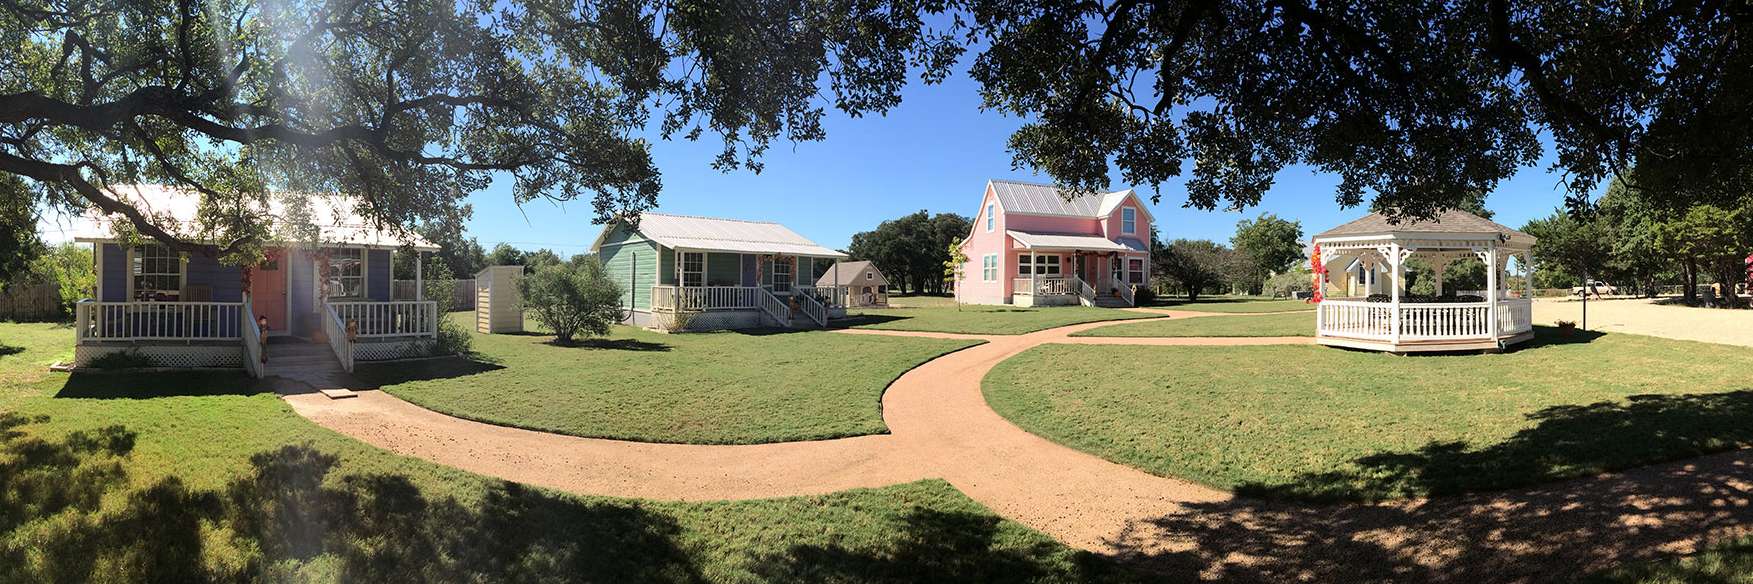 Vacation Cottages Salado Tx Yellow House Bed And Breakfast